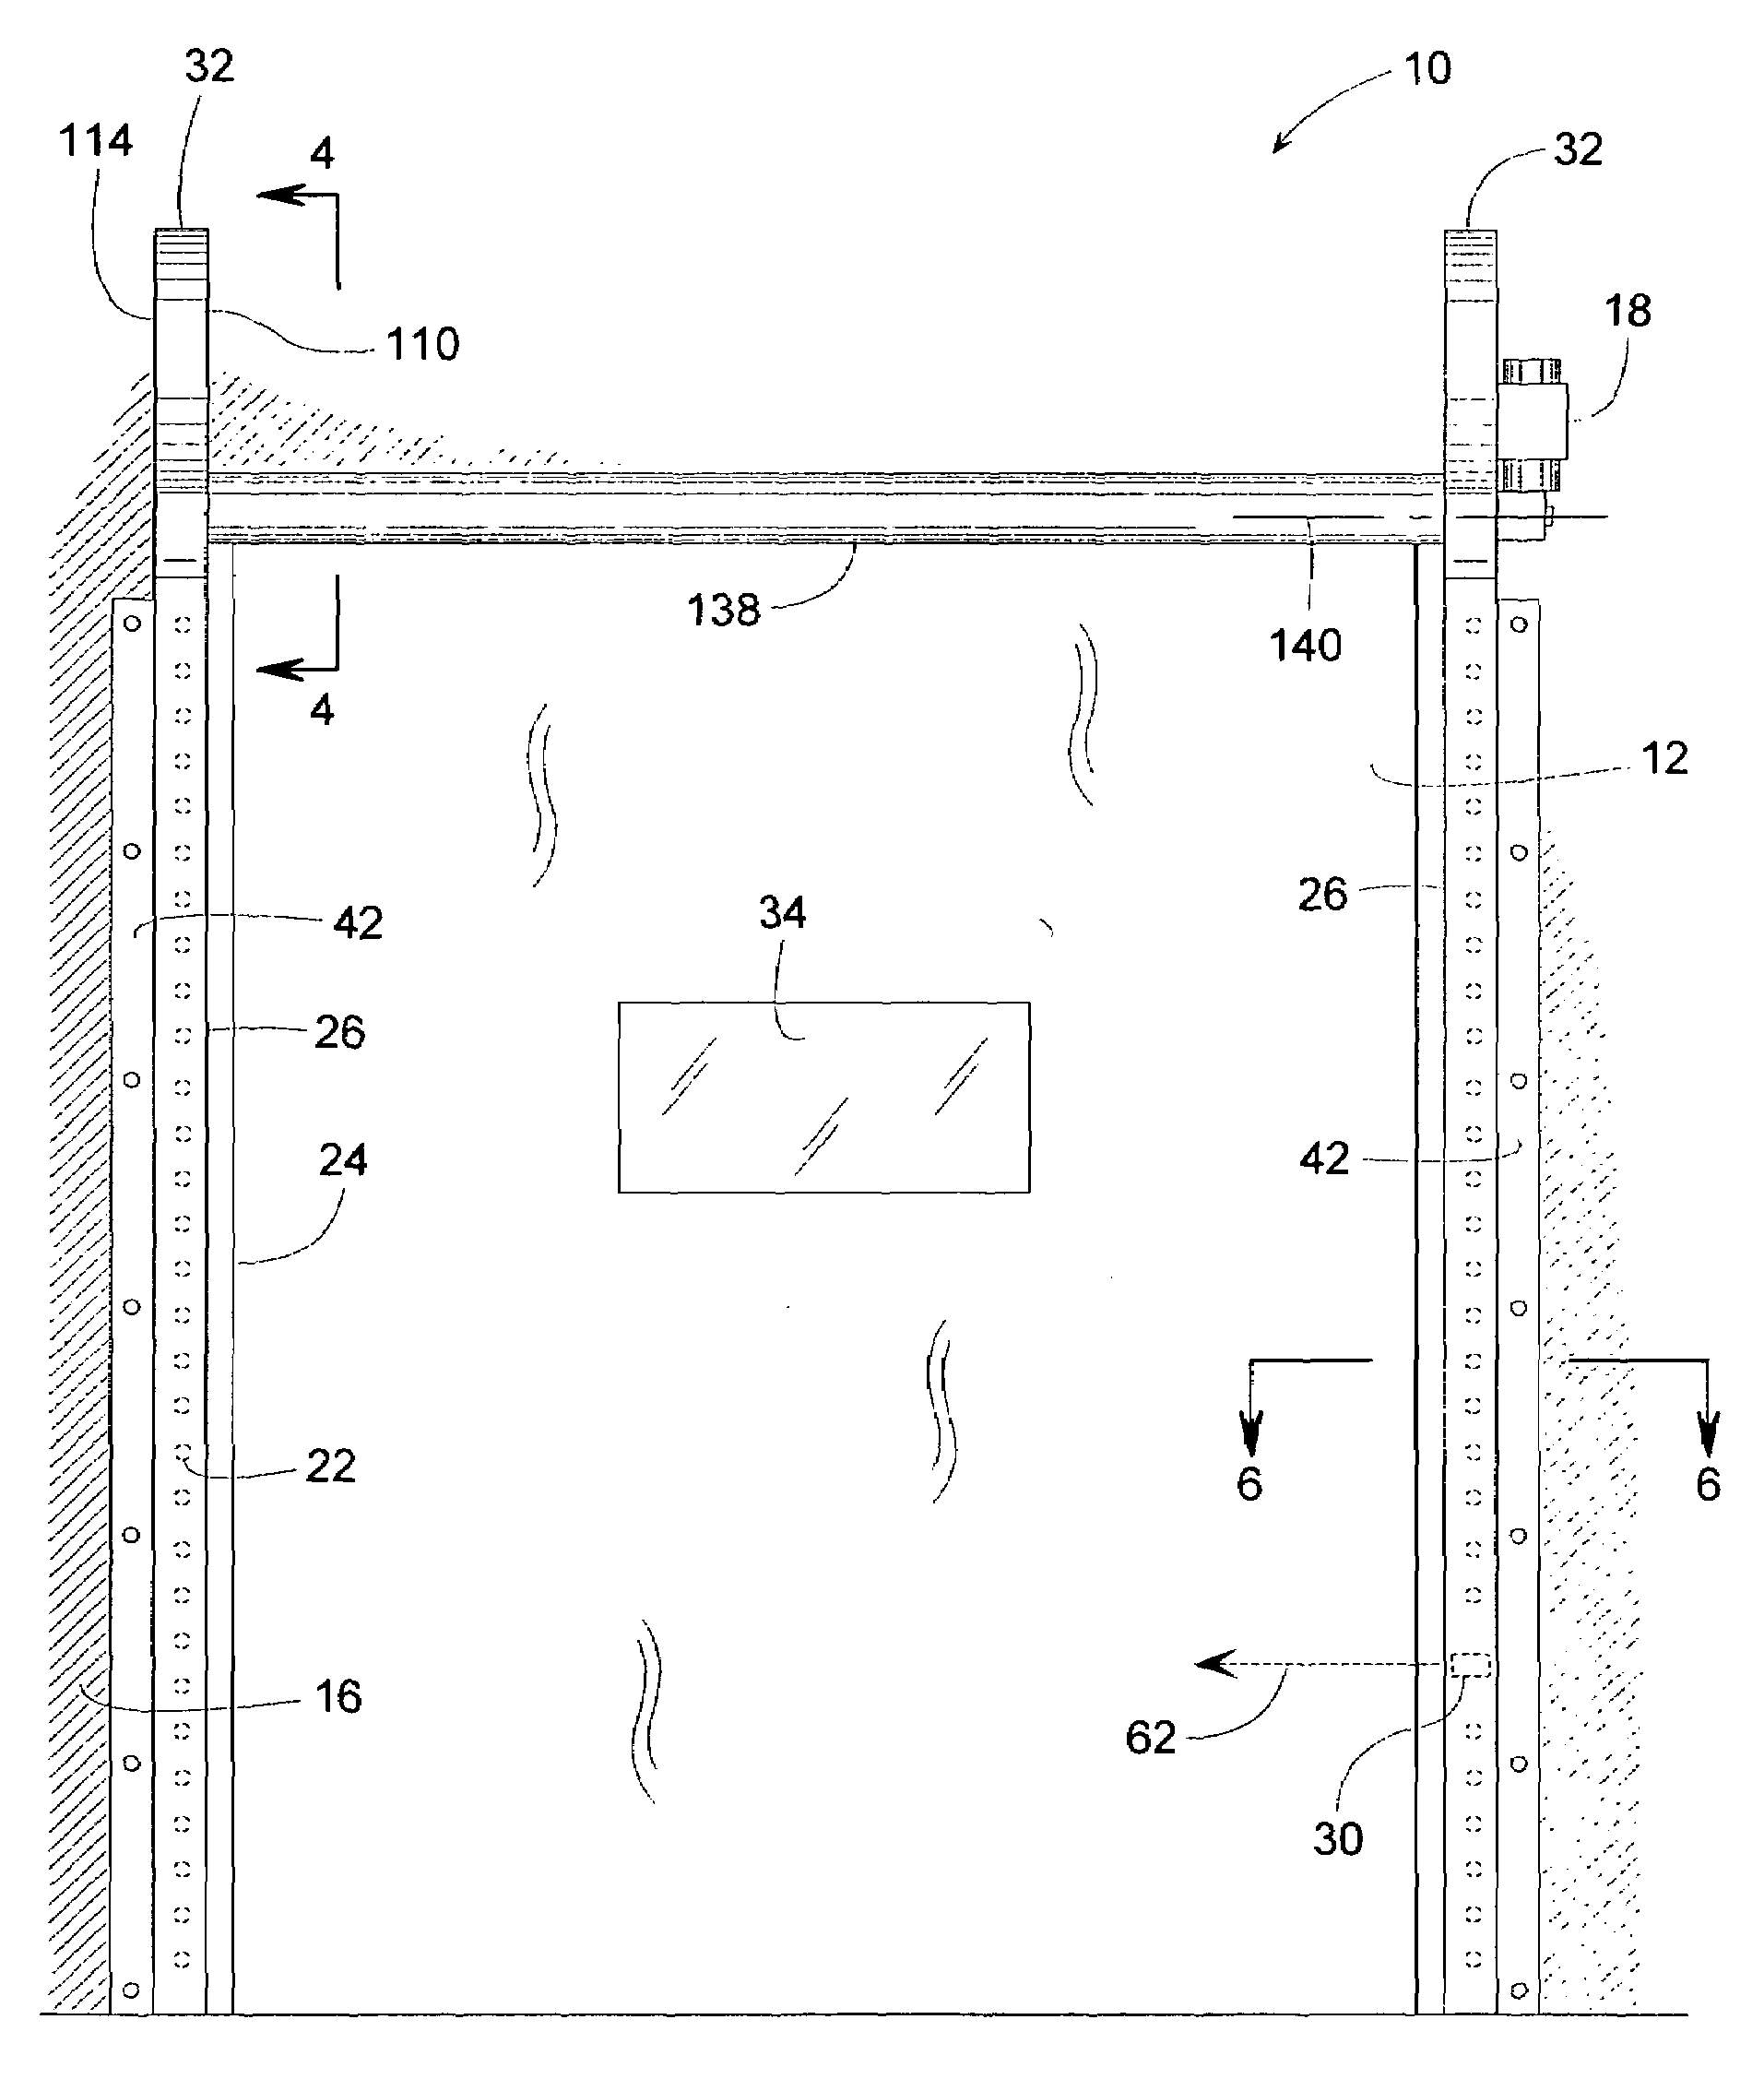 Track and guide system for a door